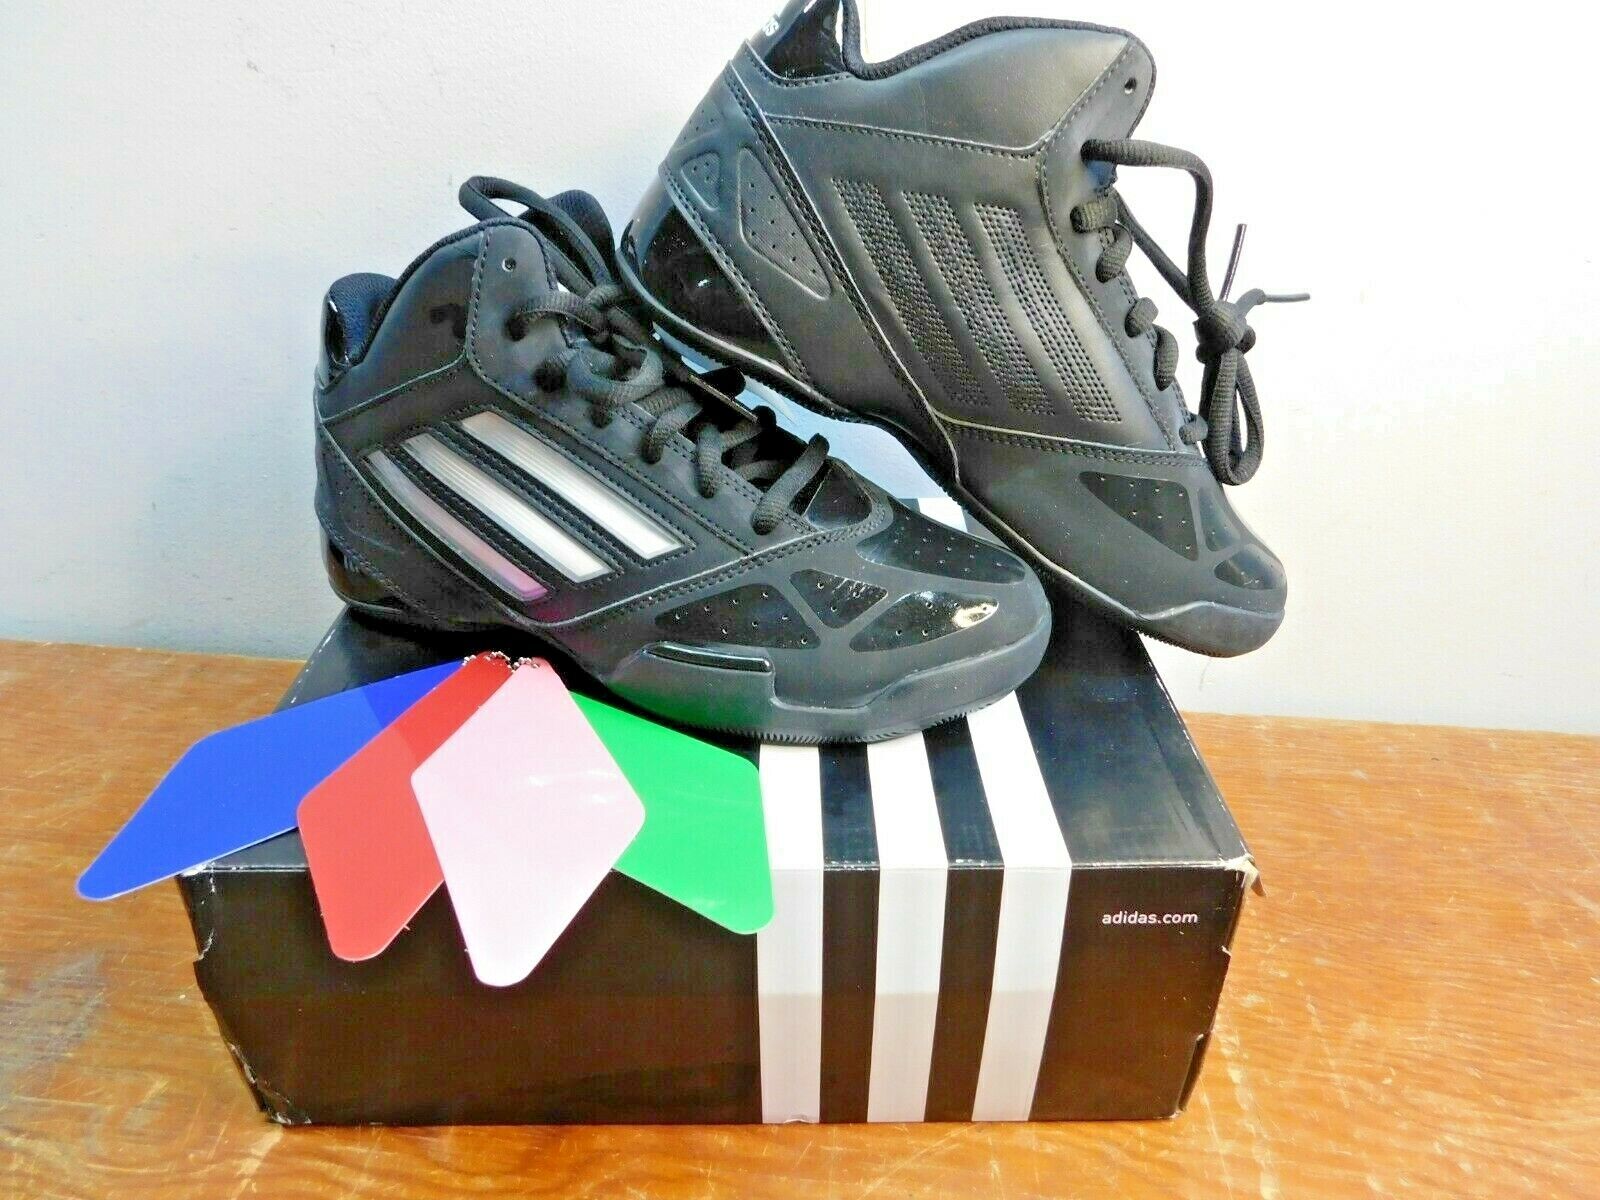 Adorable Adidas Basketball Shoes Women’s Team Feather 3 CC G56839 New in Box Size 7 on eBay